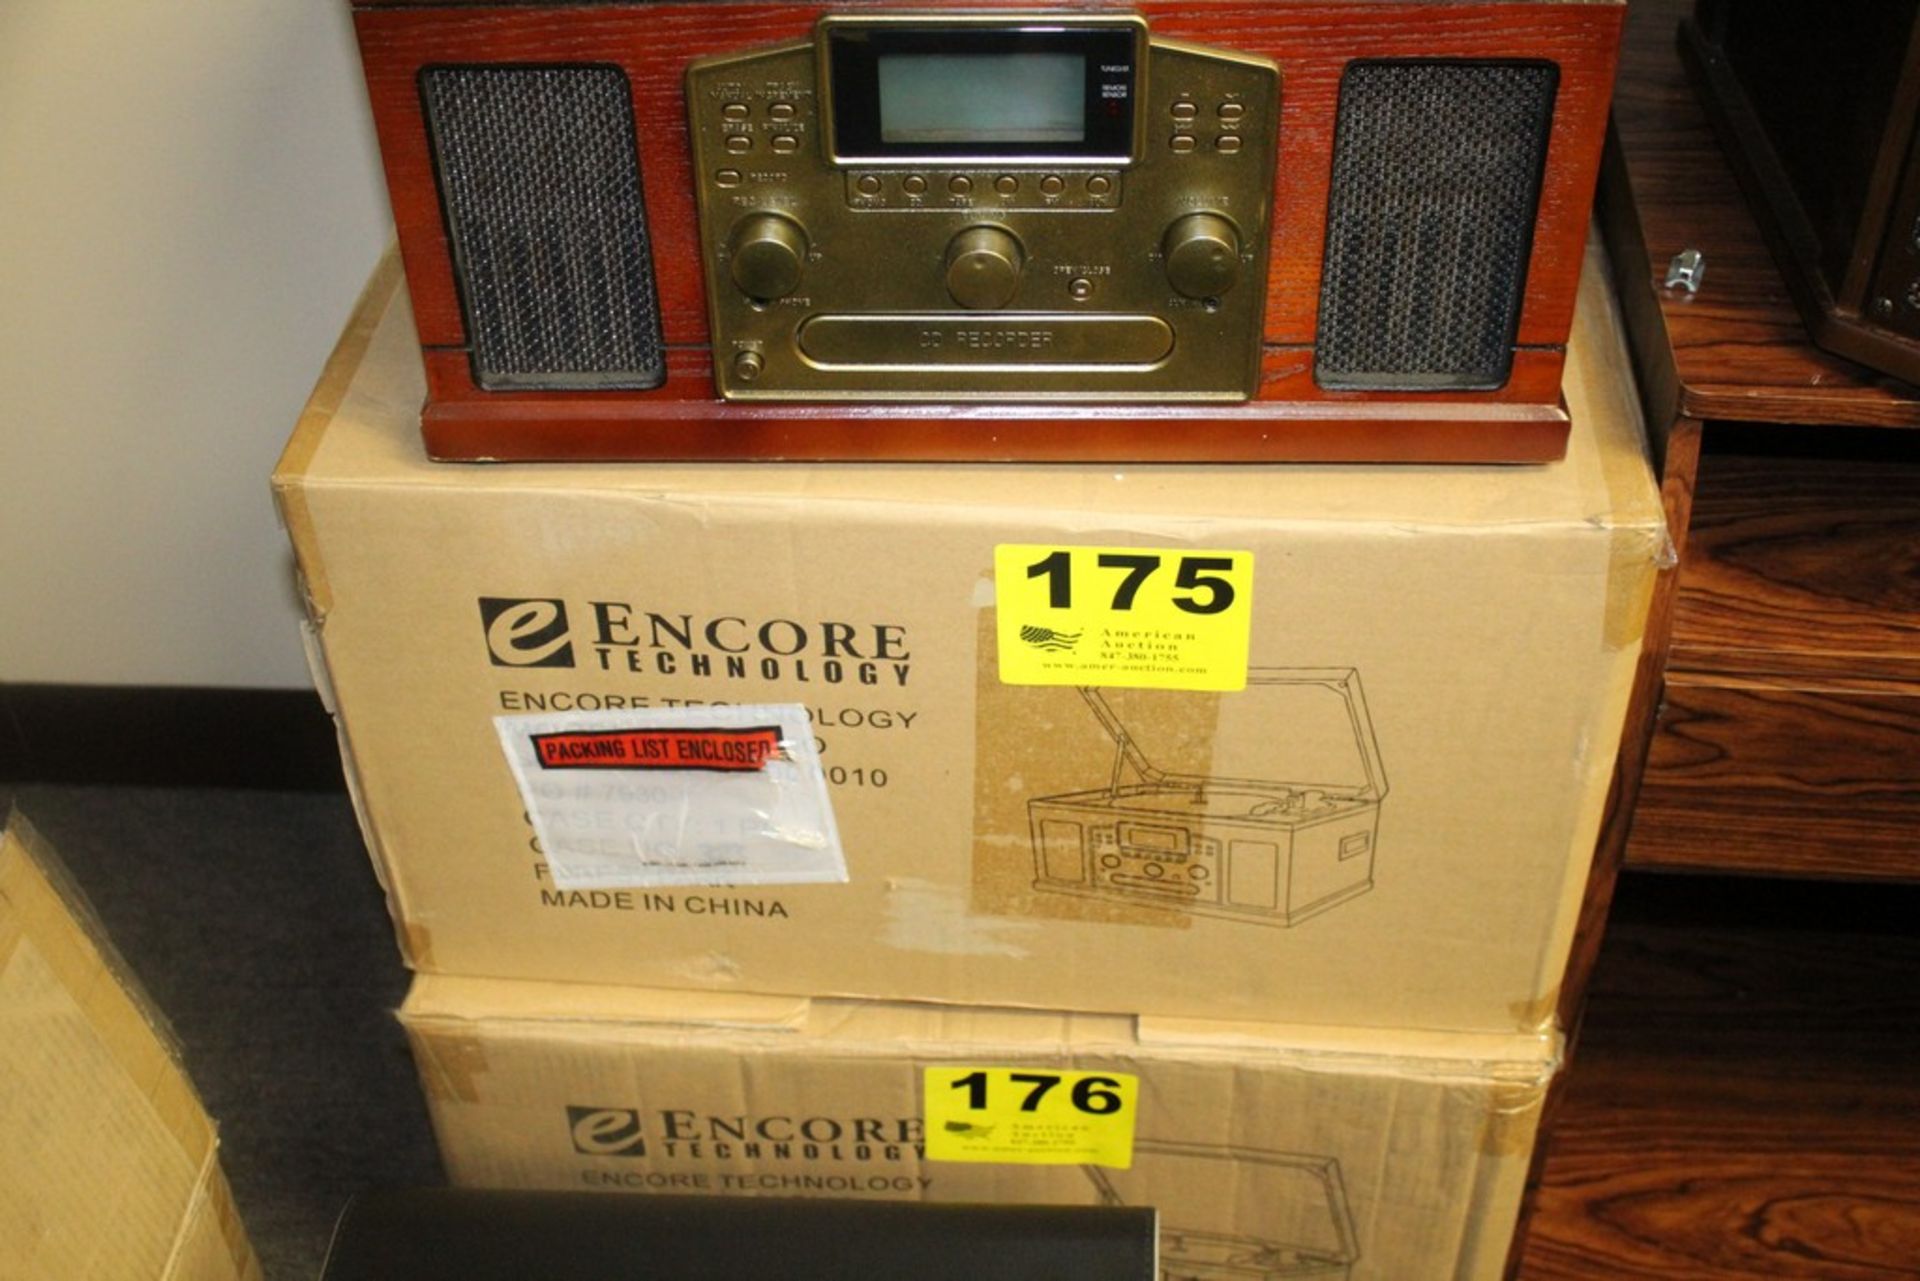 ENCORE MODEL 9369OMO TURNTABLE, AM/FM, CASSETTE AND CD RECORDER - Image 2 of 2